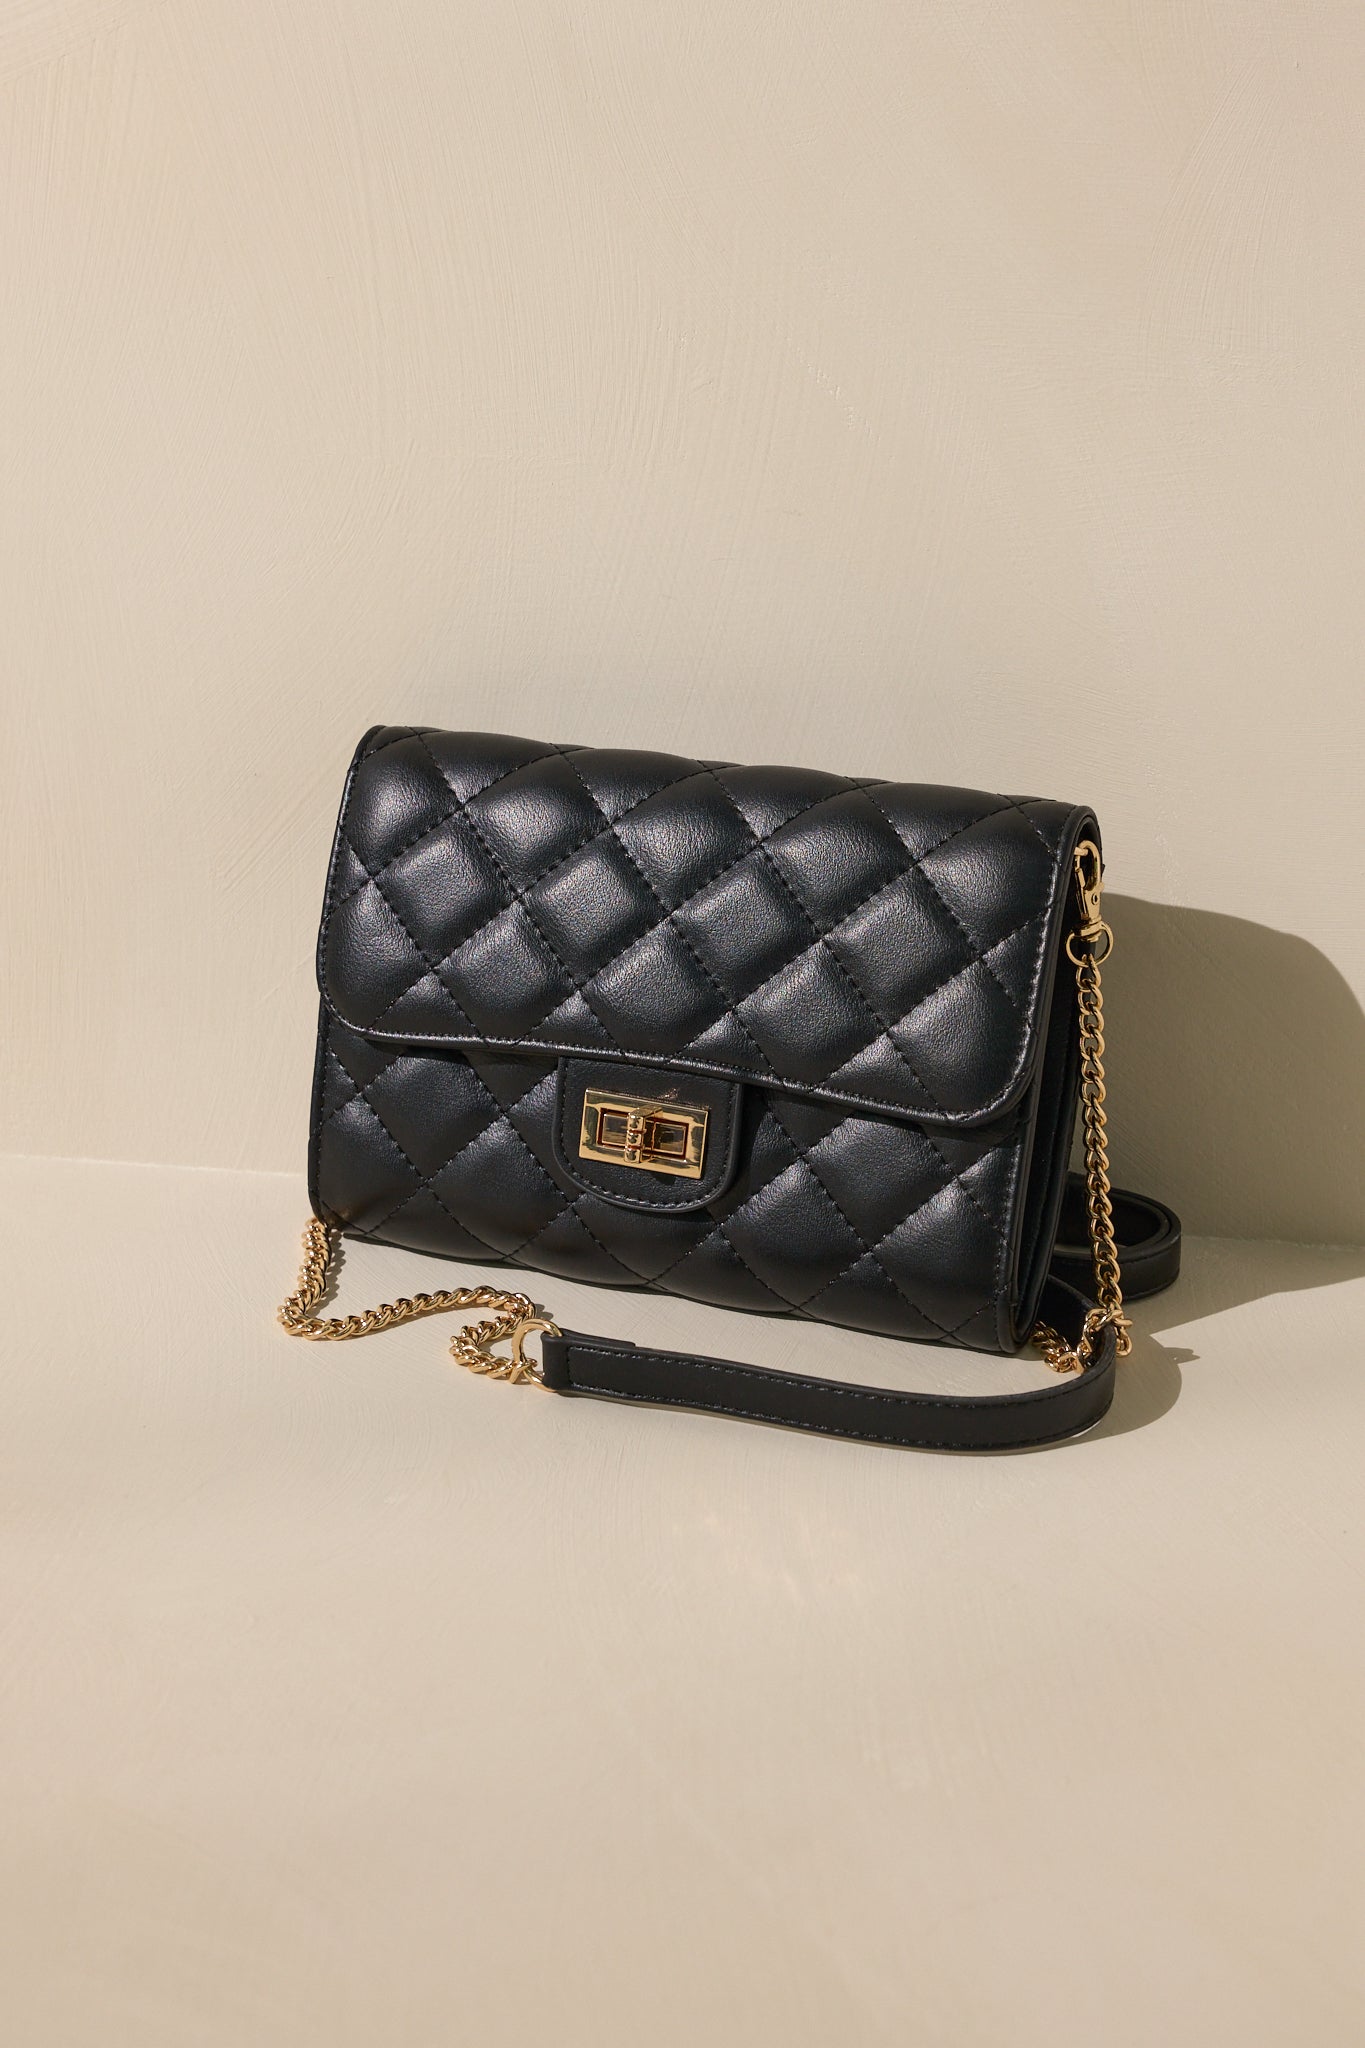 Stand alone view of this black bag that features gold hardware, a quilted design, turn lock closure, a zipper pocket inside, and a detachable chain shoulder strap.